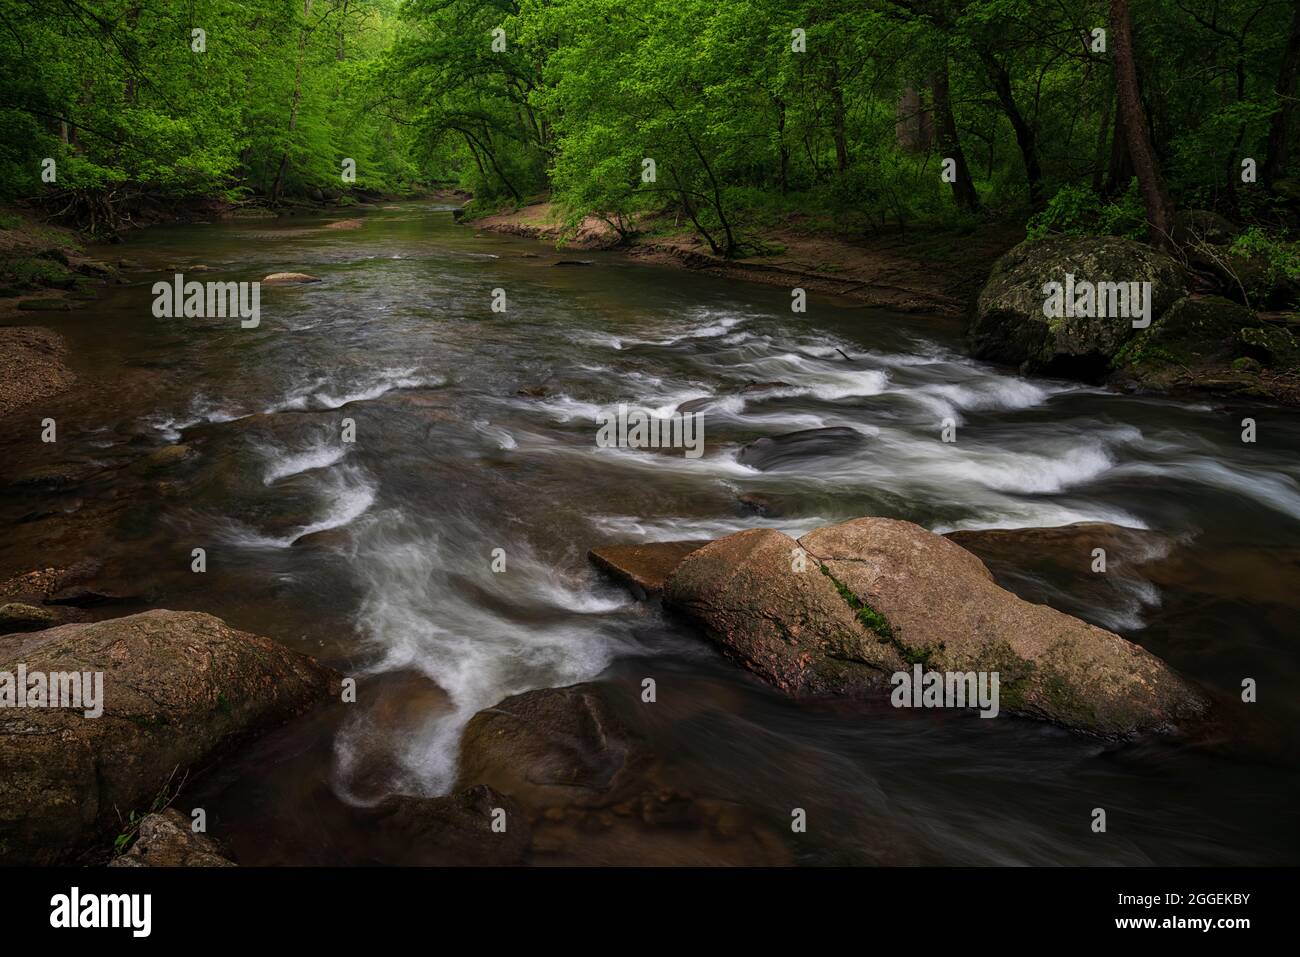 Frühling auf dem Nahen Patuxent River in Howard County, Maryland Stockfoto